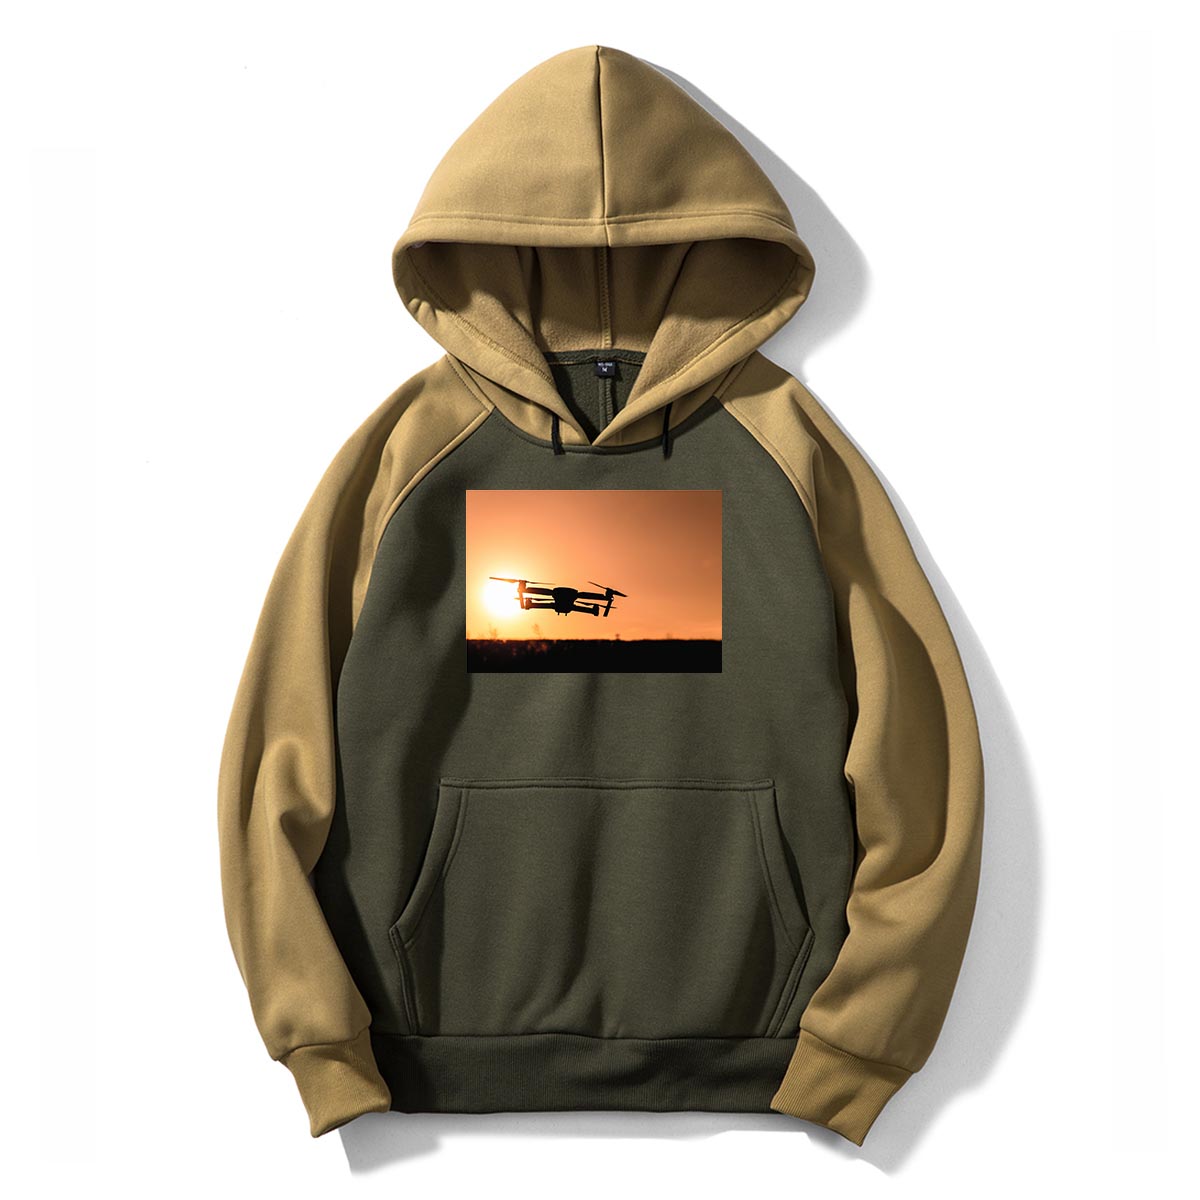 Amazing Drone in Sunset Designed Colourful Hoodies